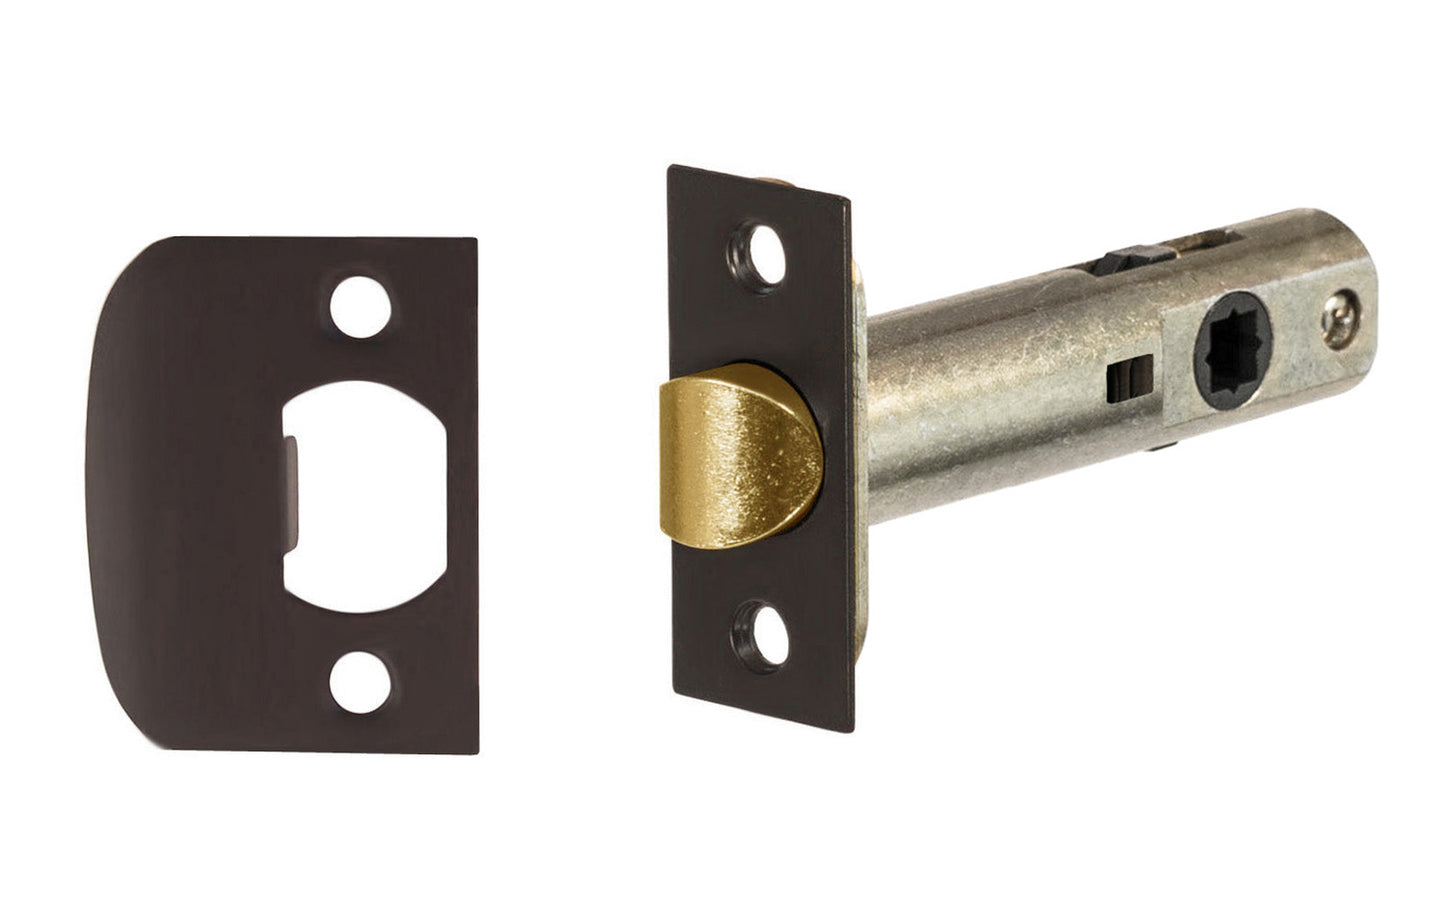 Classic Spring Latch for Doors (Passage) with 2-3/4" Backset. Designed for traditional doorknobs with square spindle shaft. Steel casing & solid brass plates. For vintage antique door knobs, or reproduction door knobs. For non-locking doors. Oil Rubbed Bronze Finish.